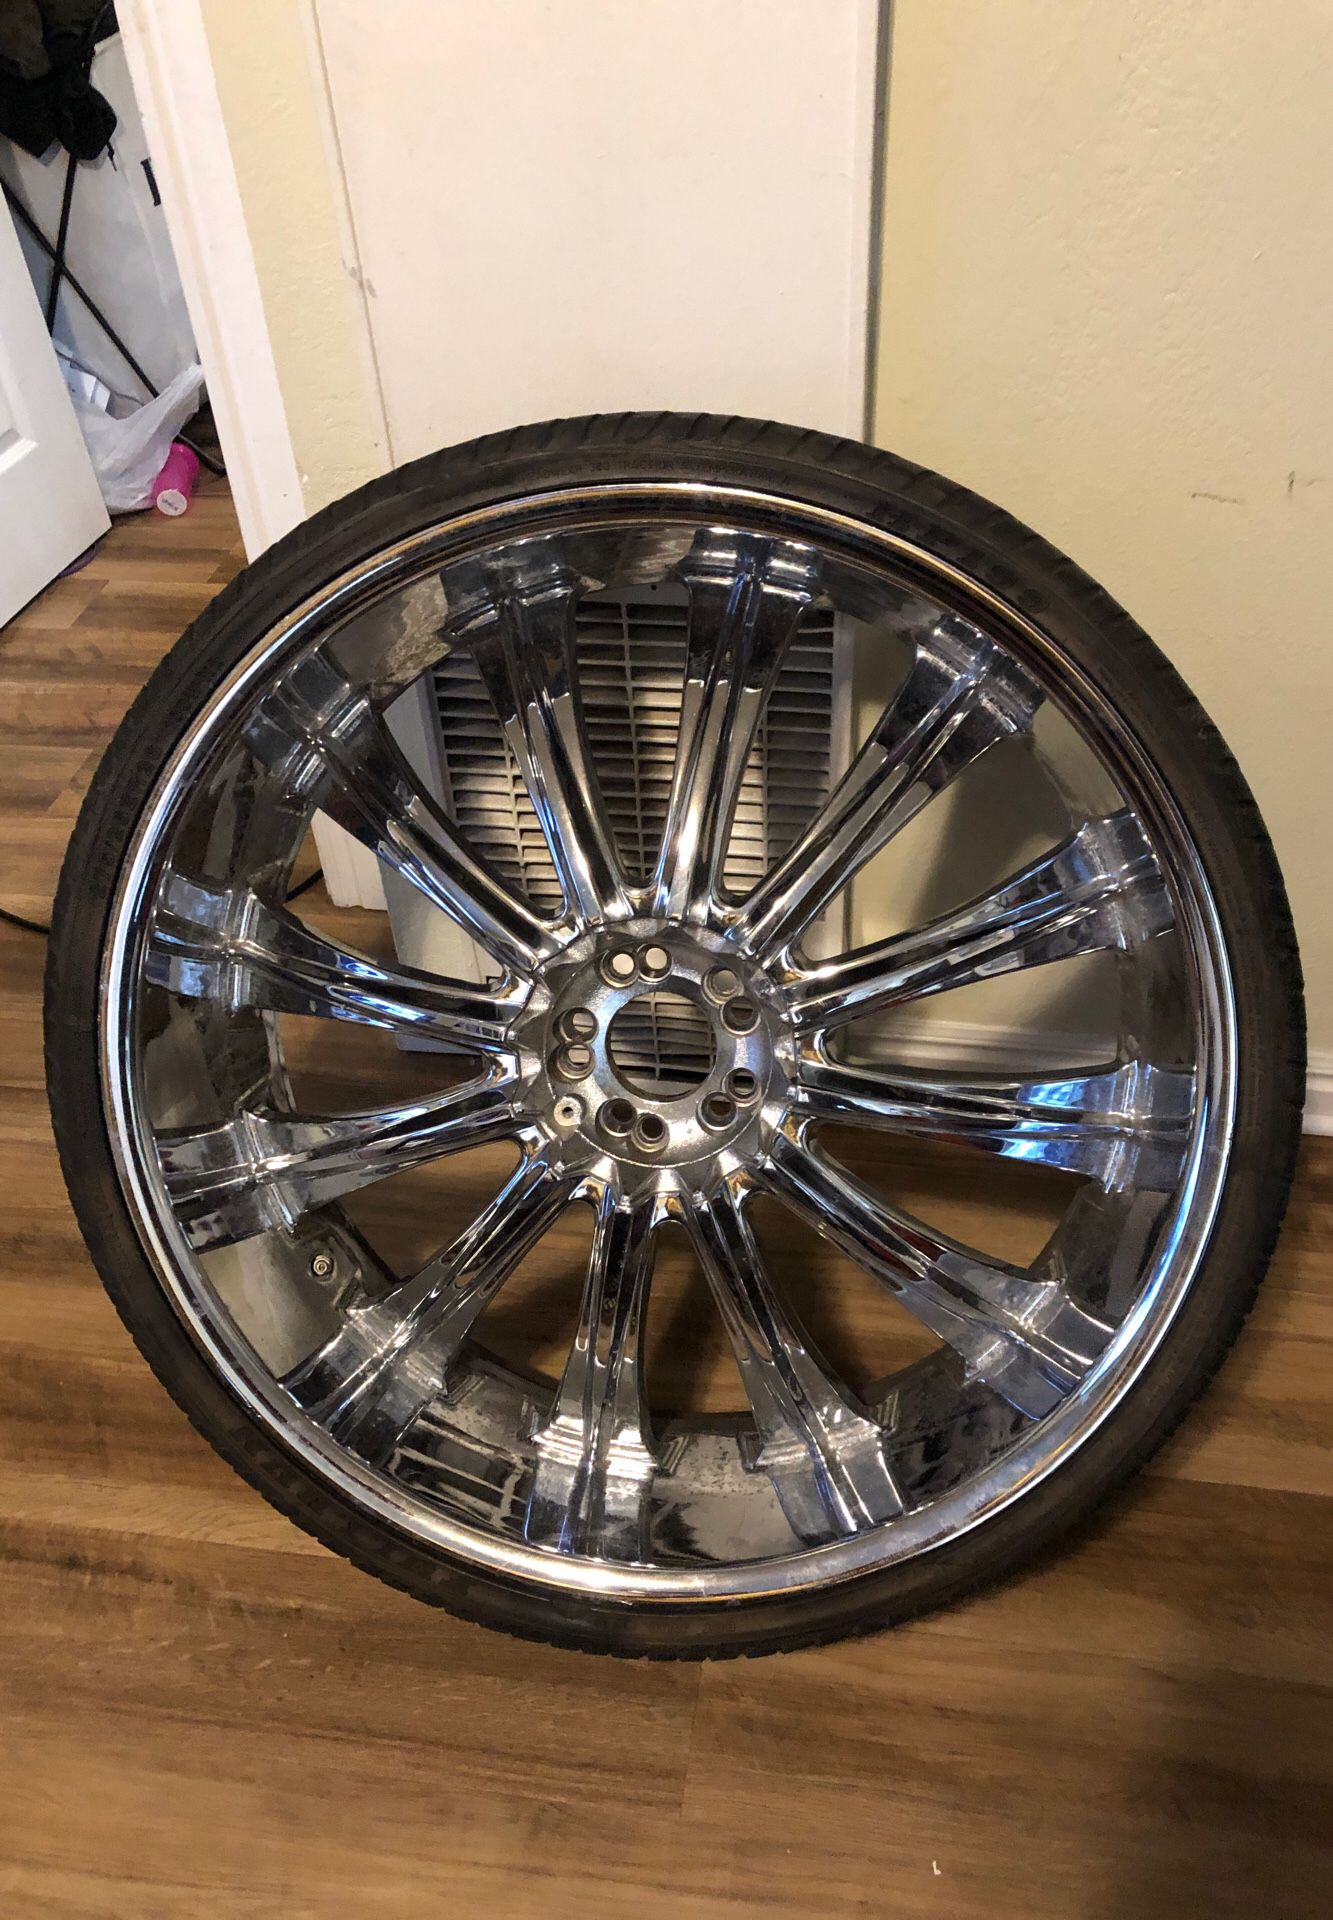 26” Rims with tires